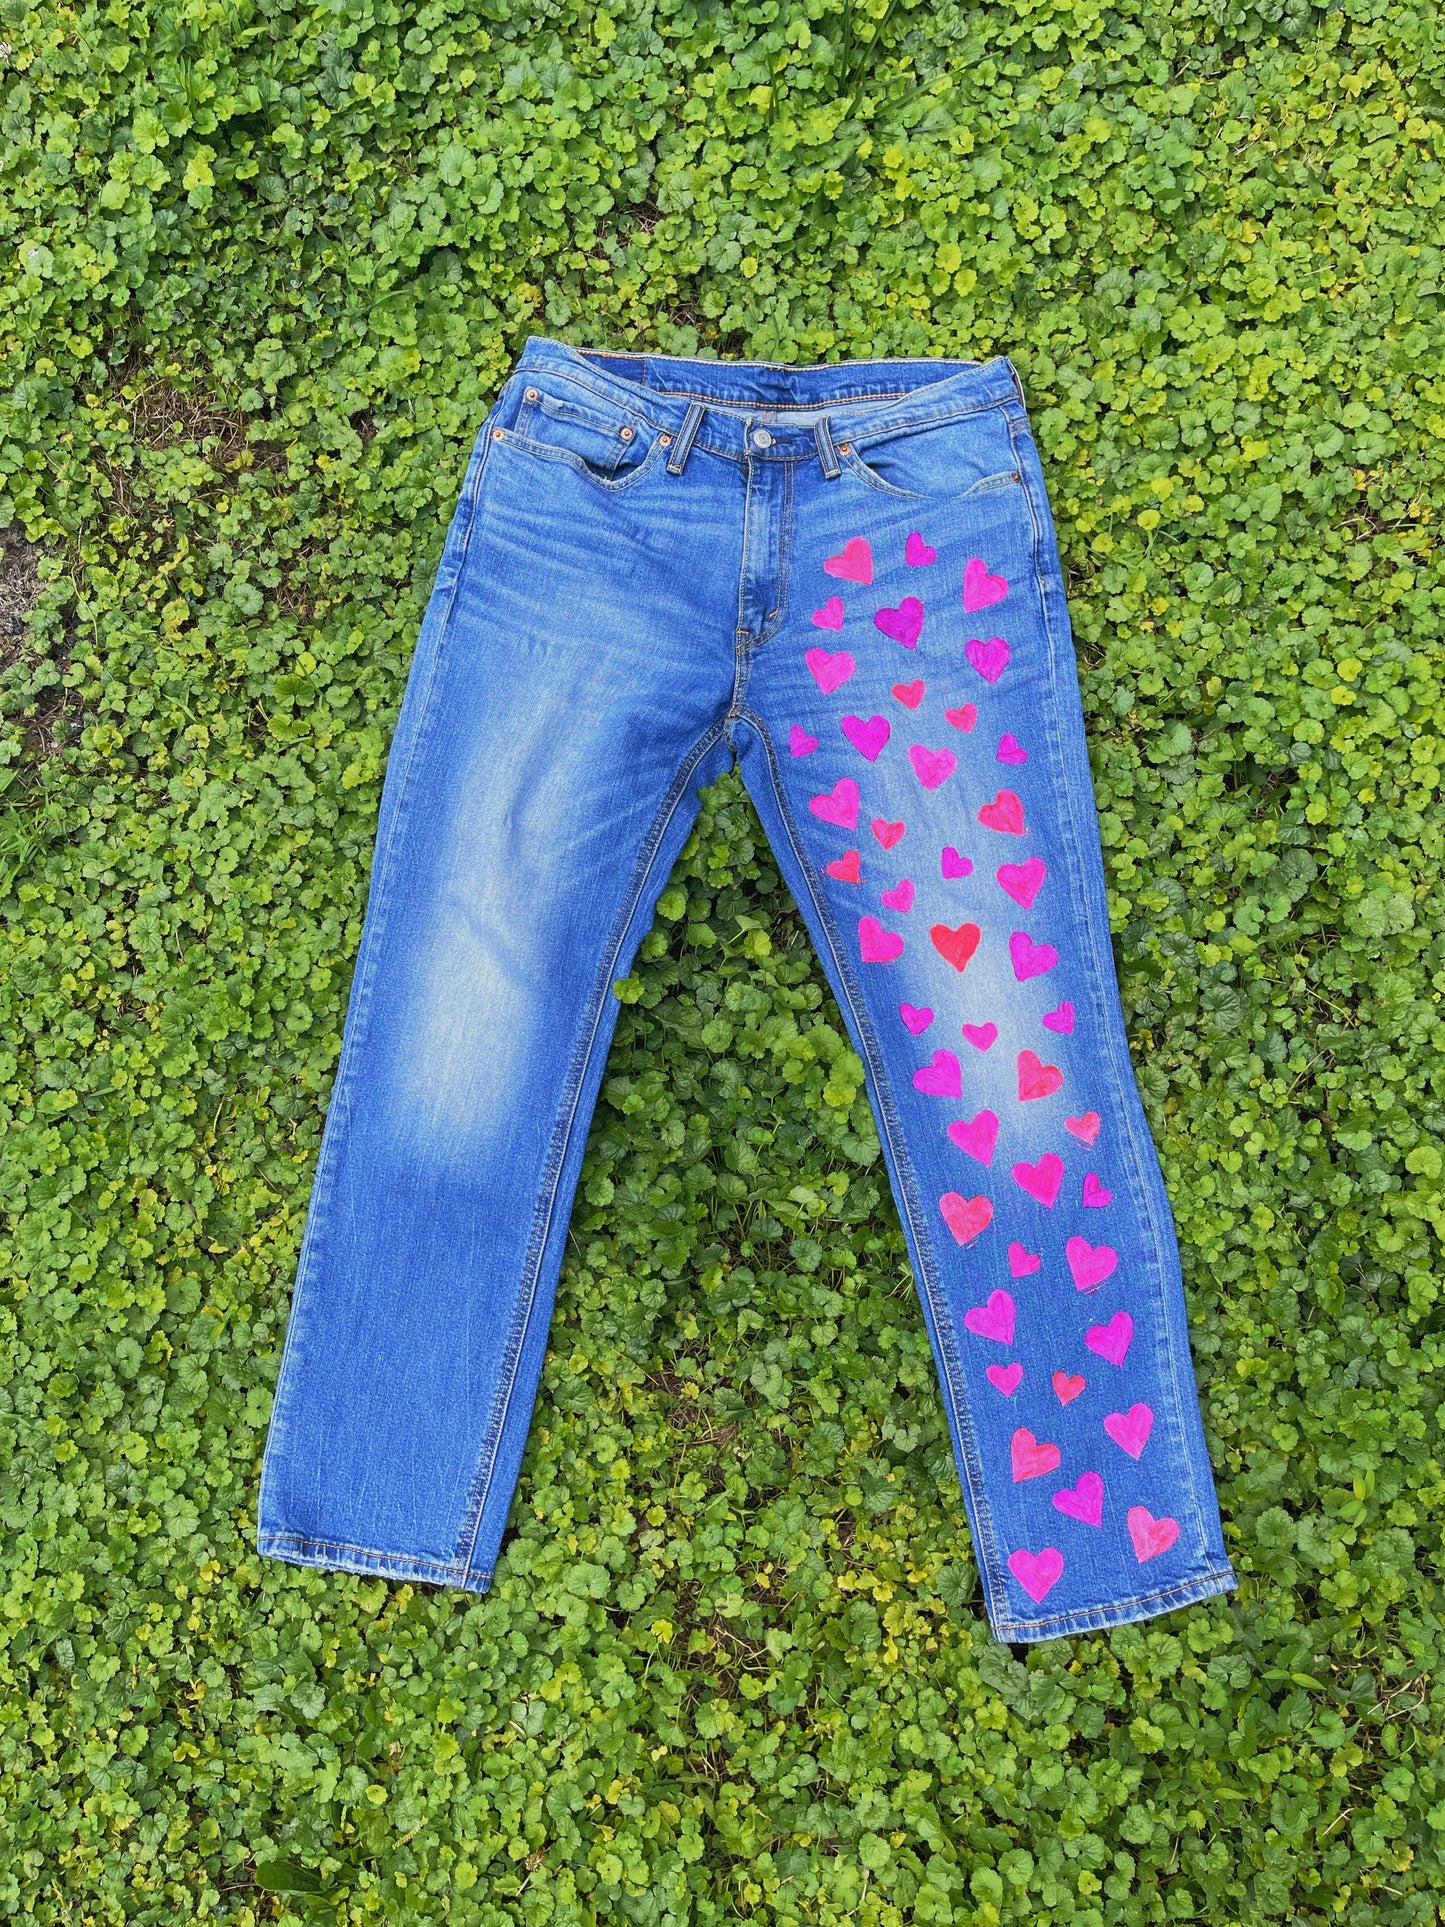 SEND IN YOUR DENIM | Surprise PAINTED Jeans